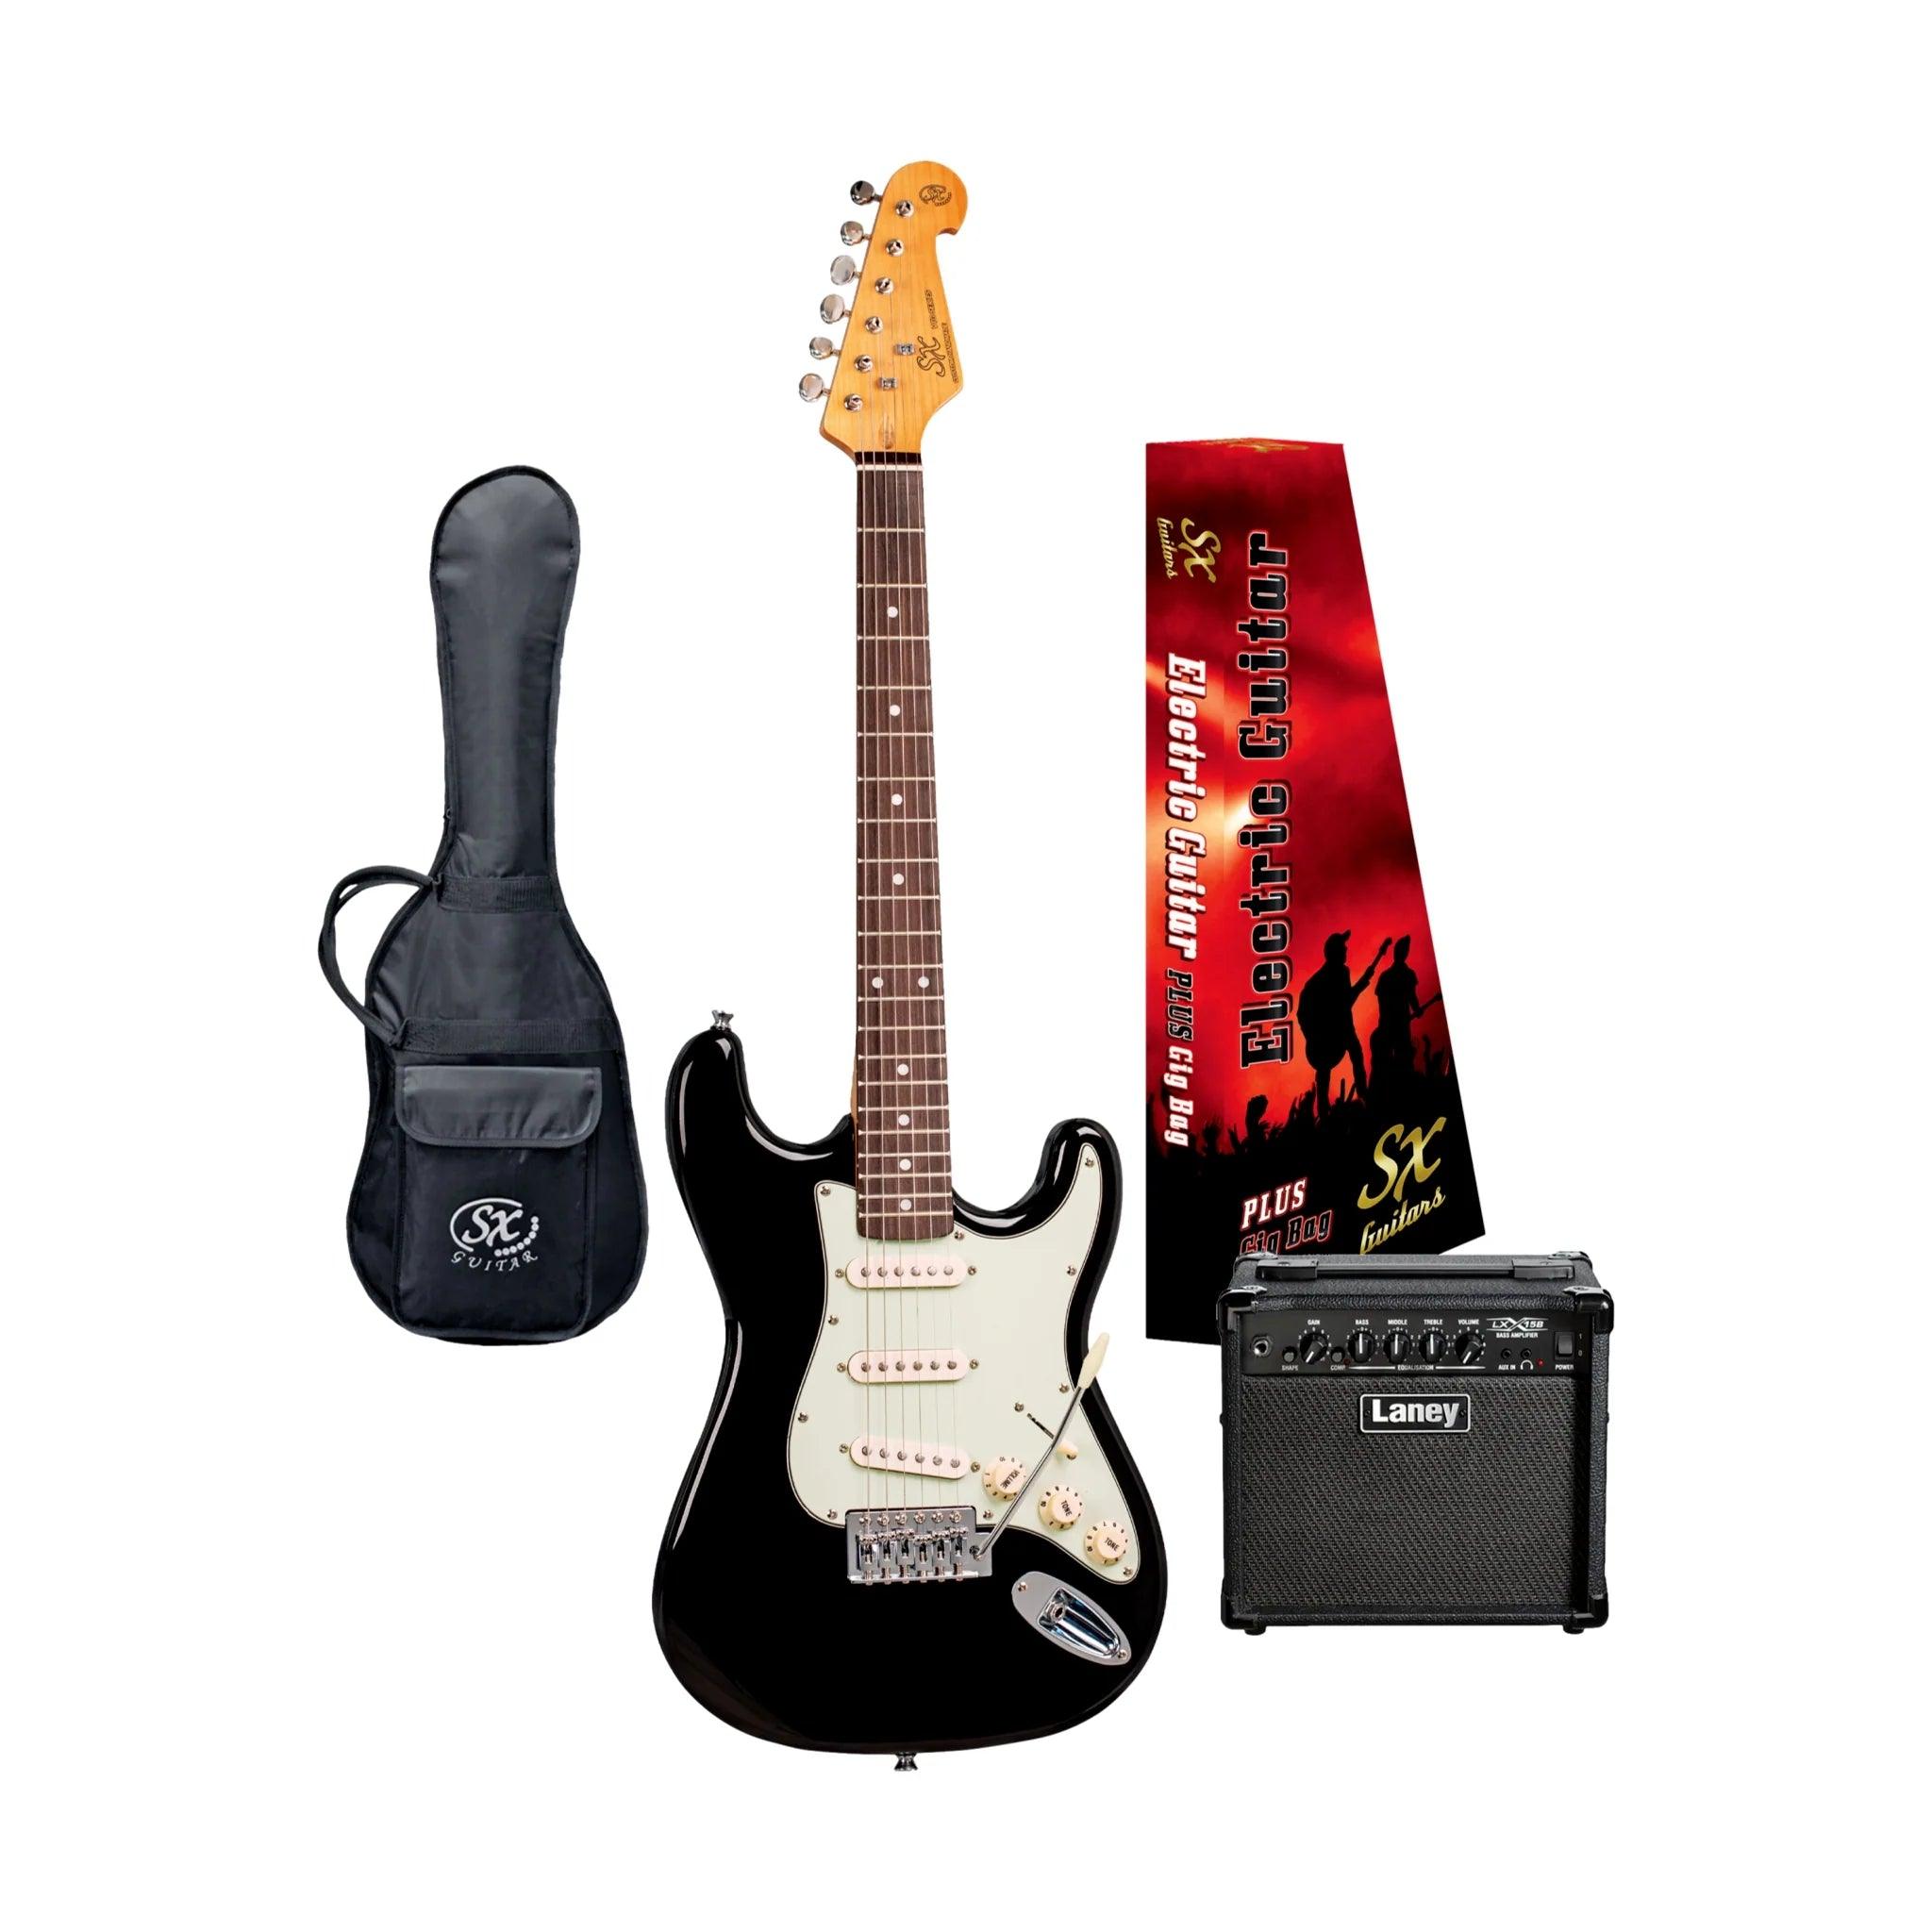 SX Black Electric Guitar and LX15 Amp Pack - Guitars - Electric by SX at Muso's Stuff